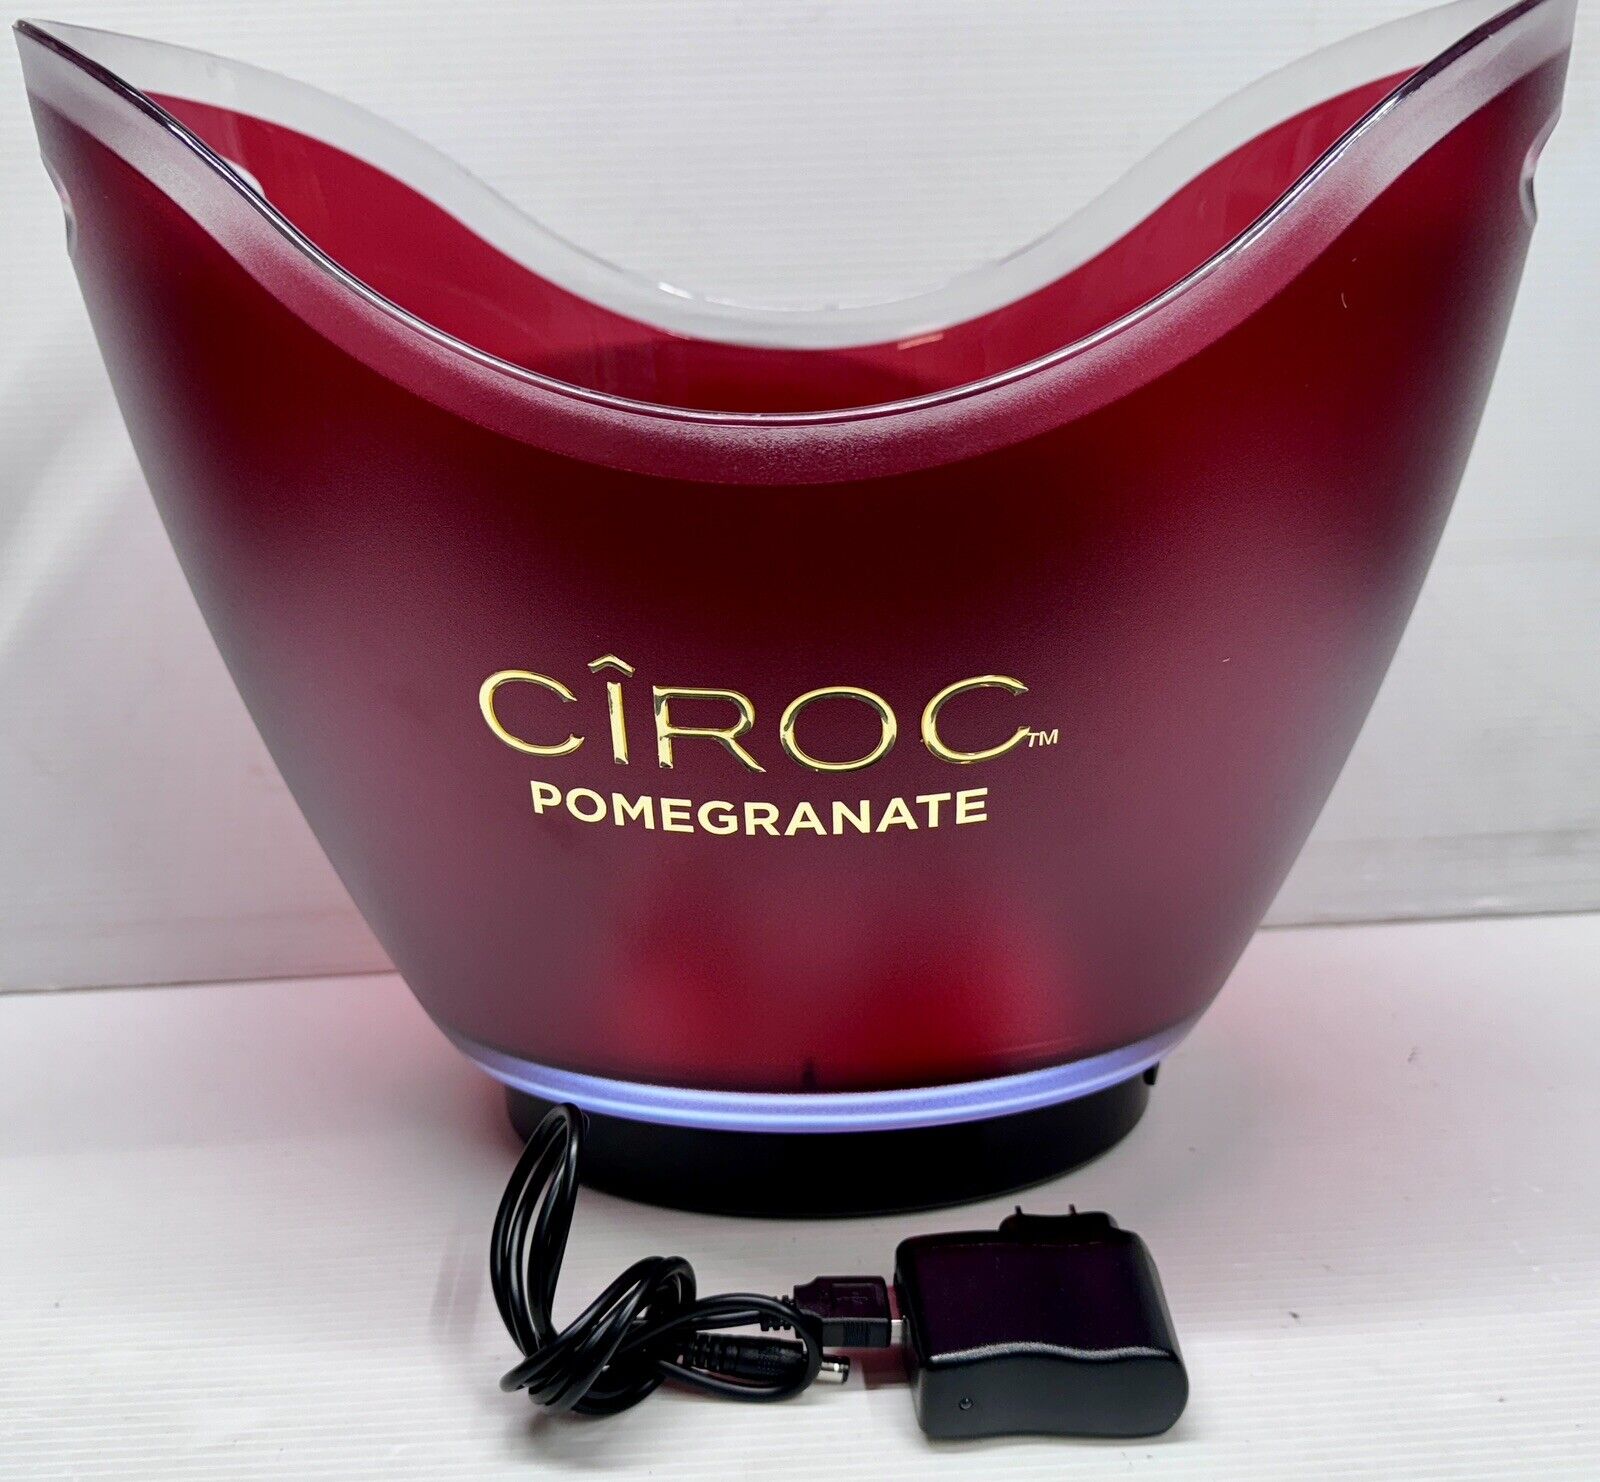 Ciroc Pomegranate Light Up LED Ice Bucket Sign w/ Handles Red Chargeable